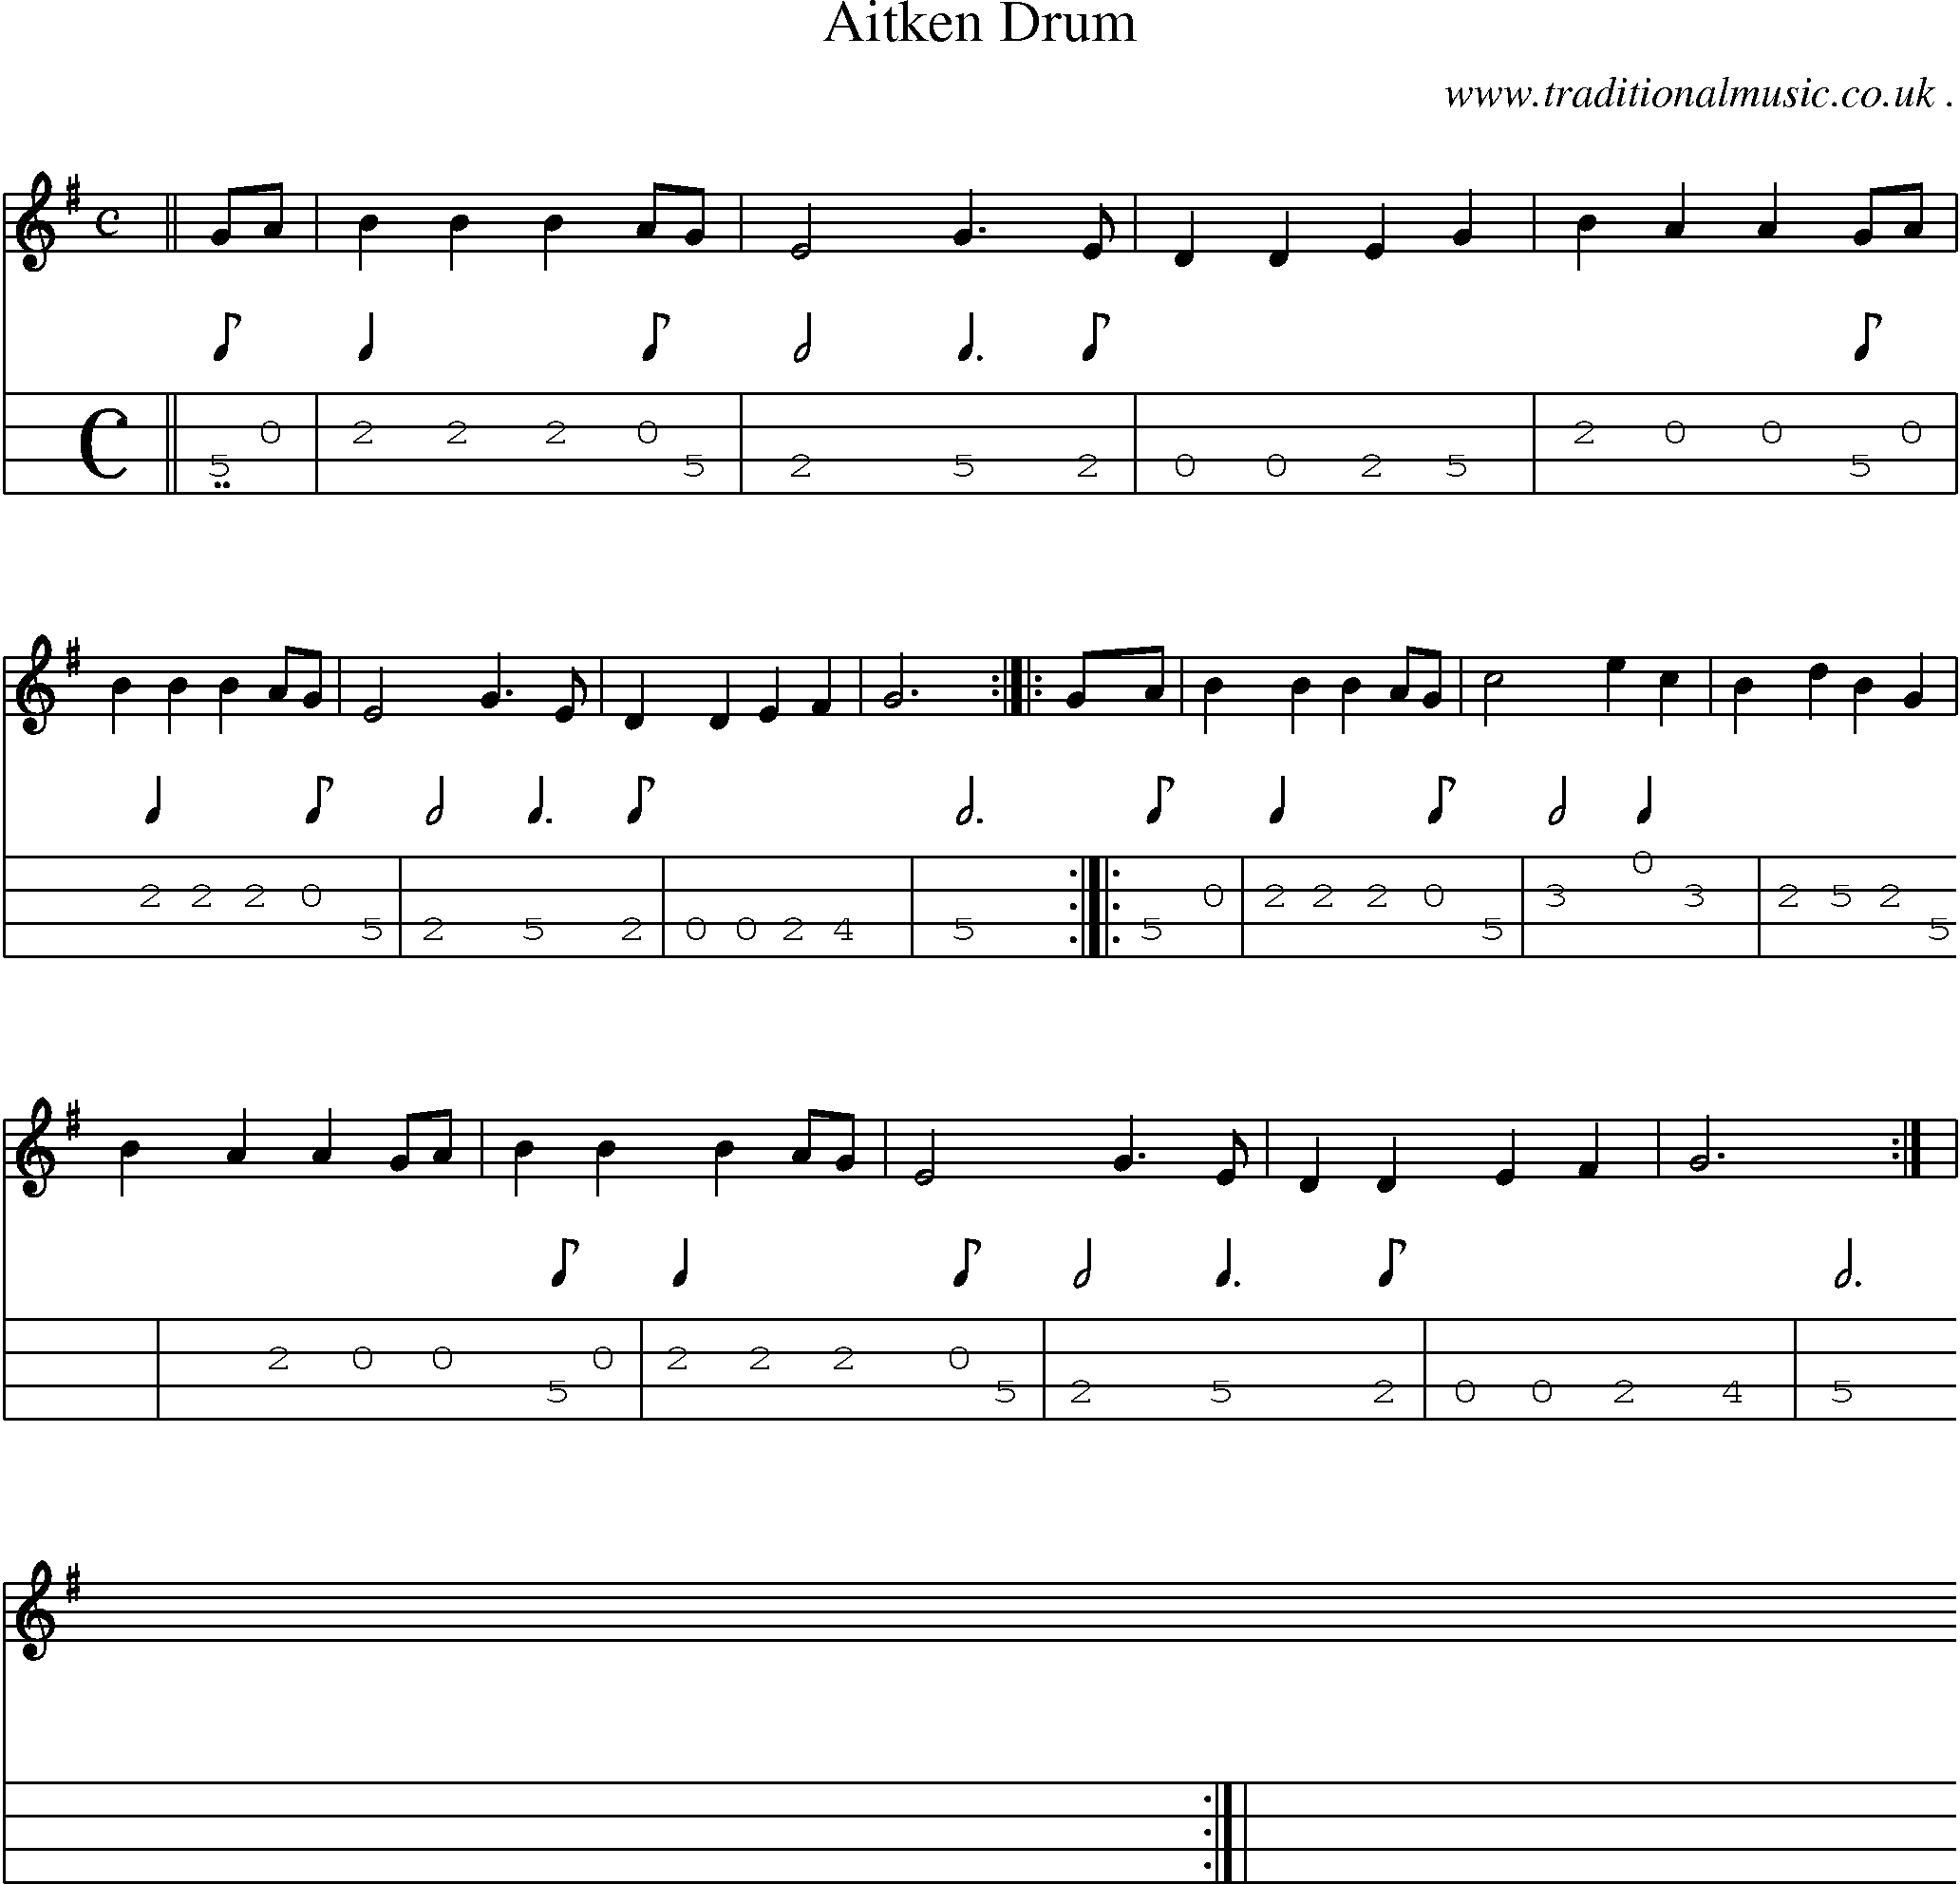 Sheet-music  score, Chords and Mandolin Tabs for Aitken Drum